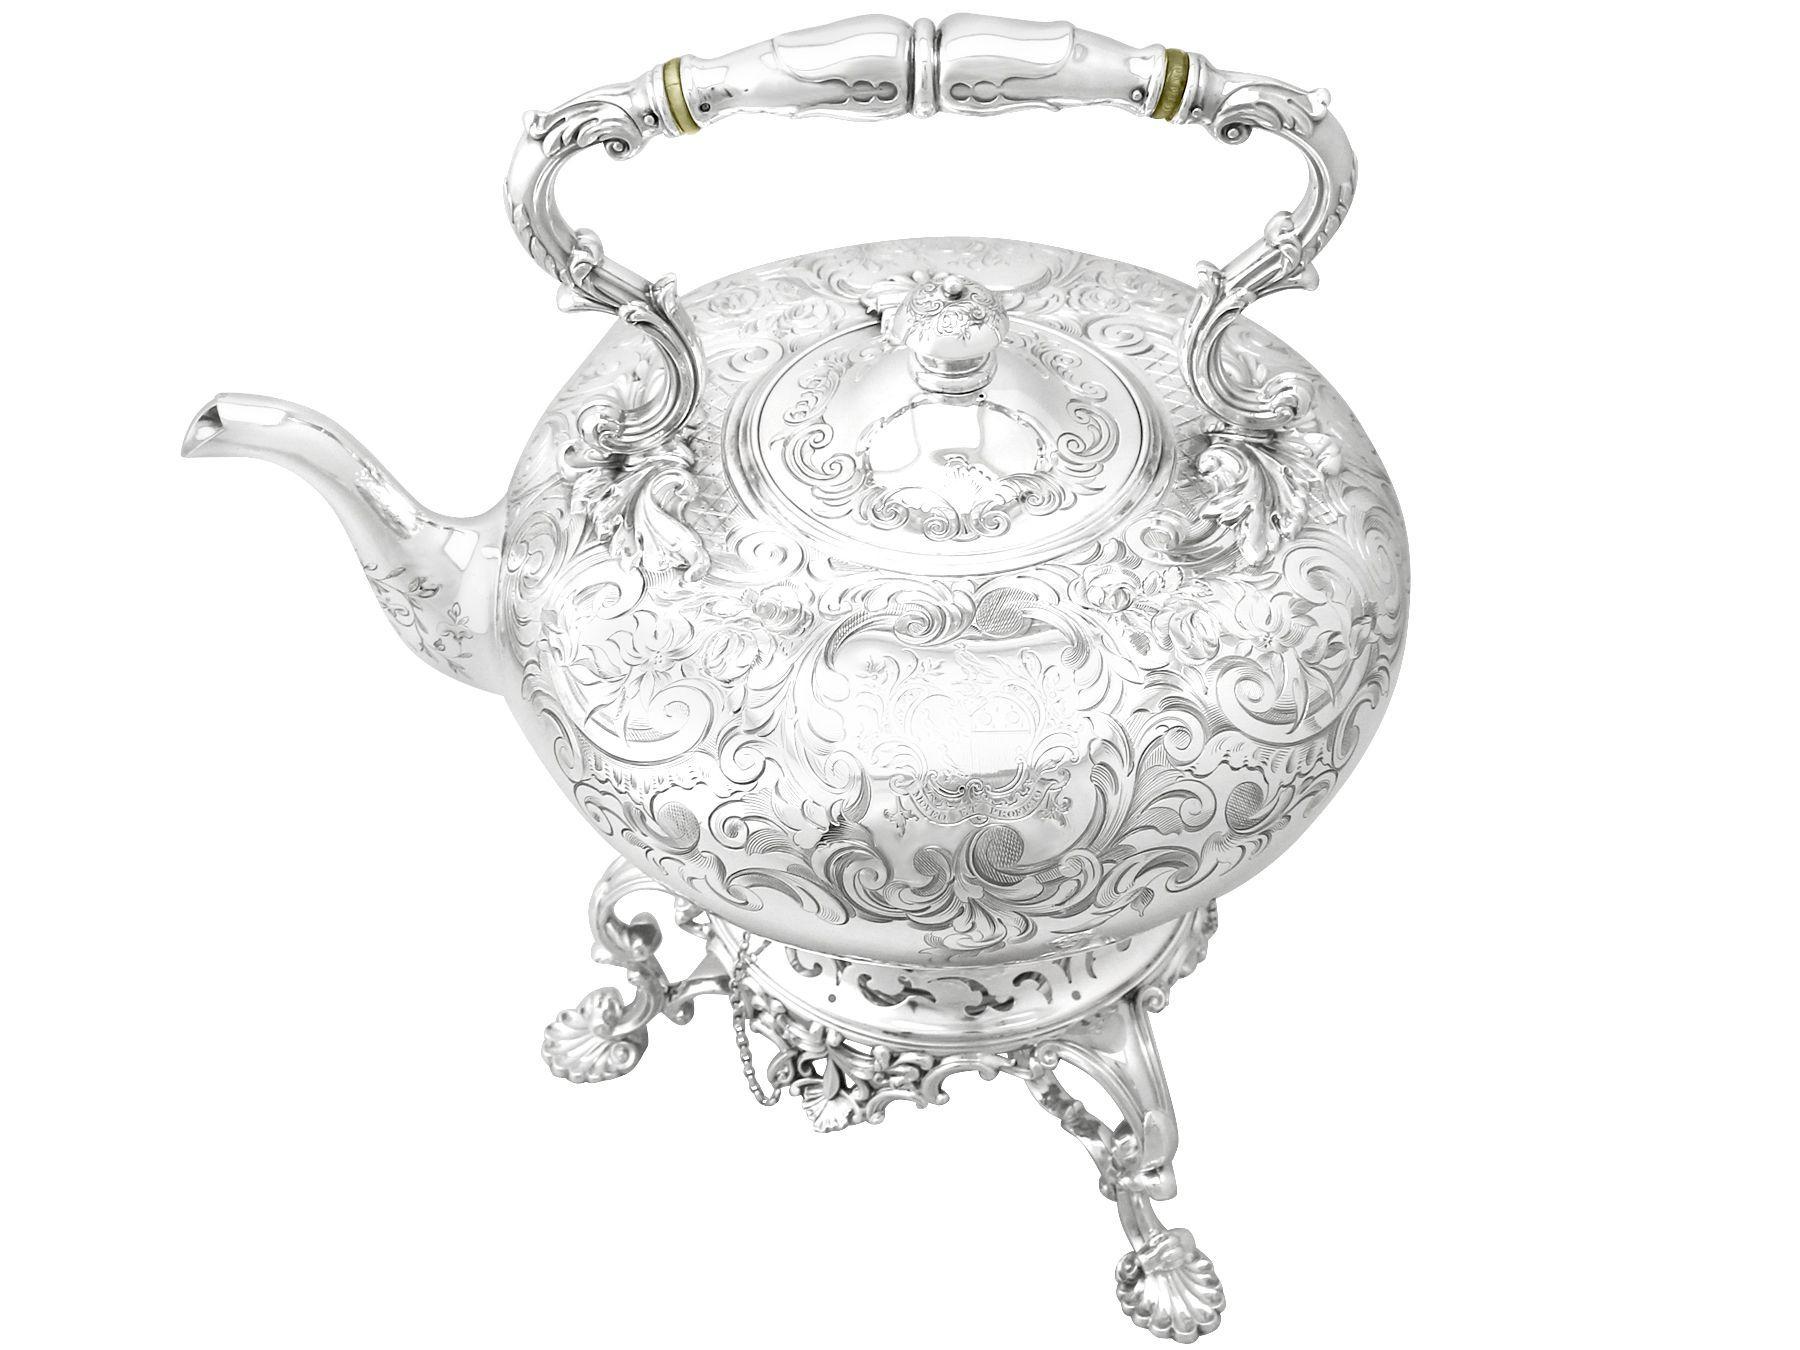 An exceptional, fine and impressive, antique Victorian English sterling silver spirit kettle; an addition to our antique silver Teaware collection.

This exceptional antique Victorian sterling silver spirit kettle has a bulbous shaped form.

The